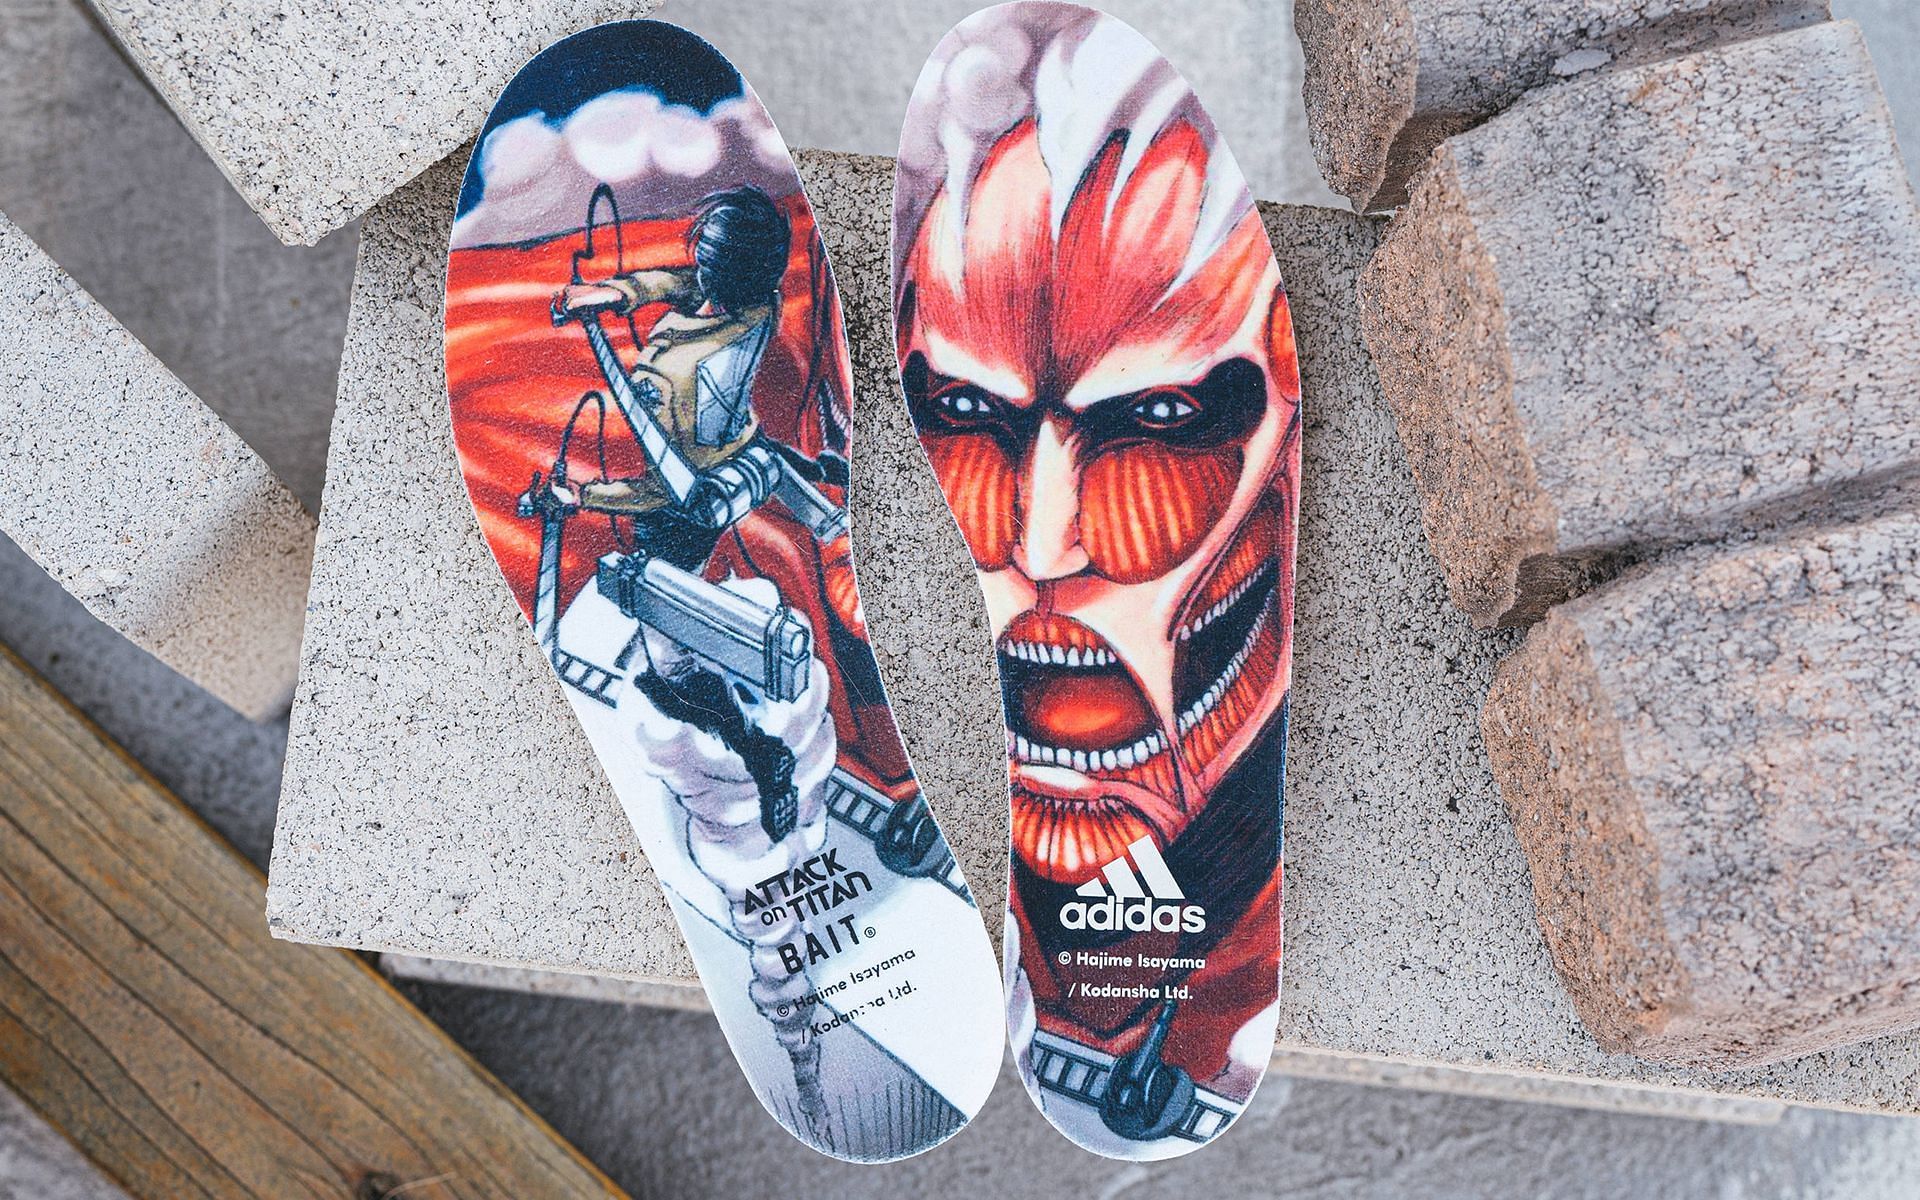 Attack on Titan printed upon Adidas Ultra Boost insoles (Image via Bait)